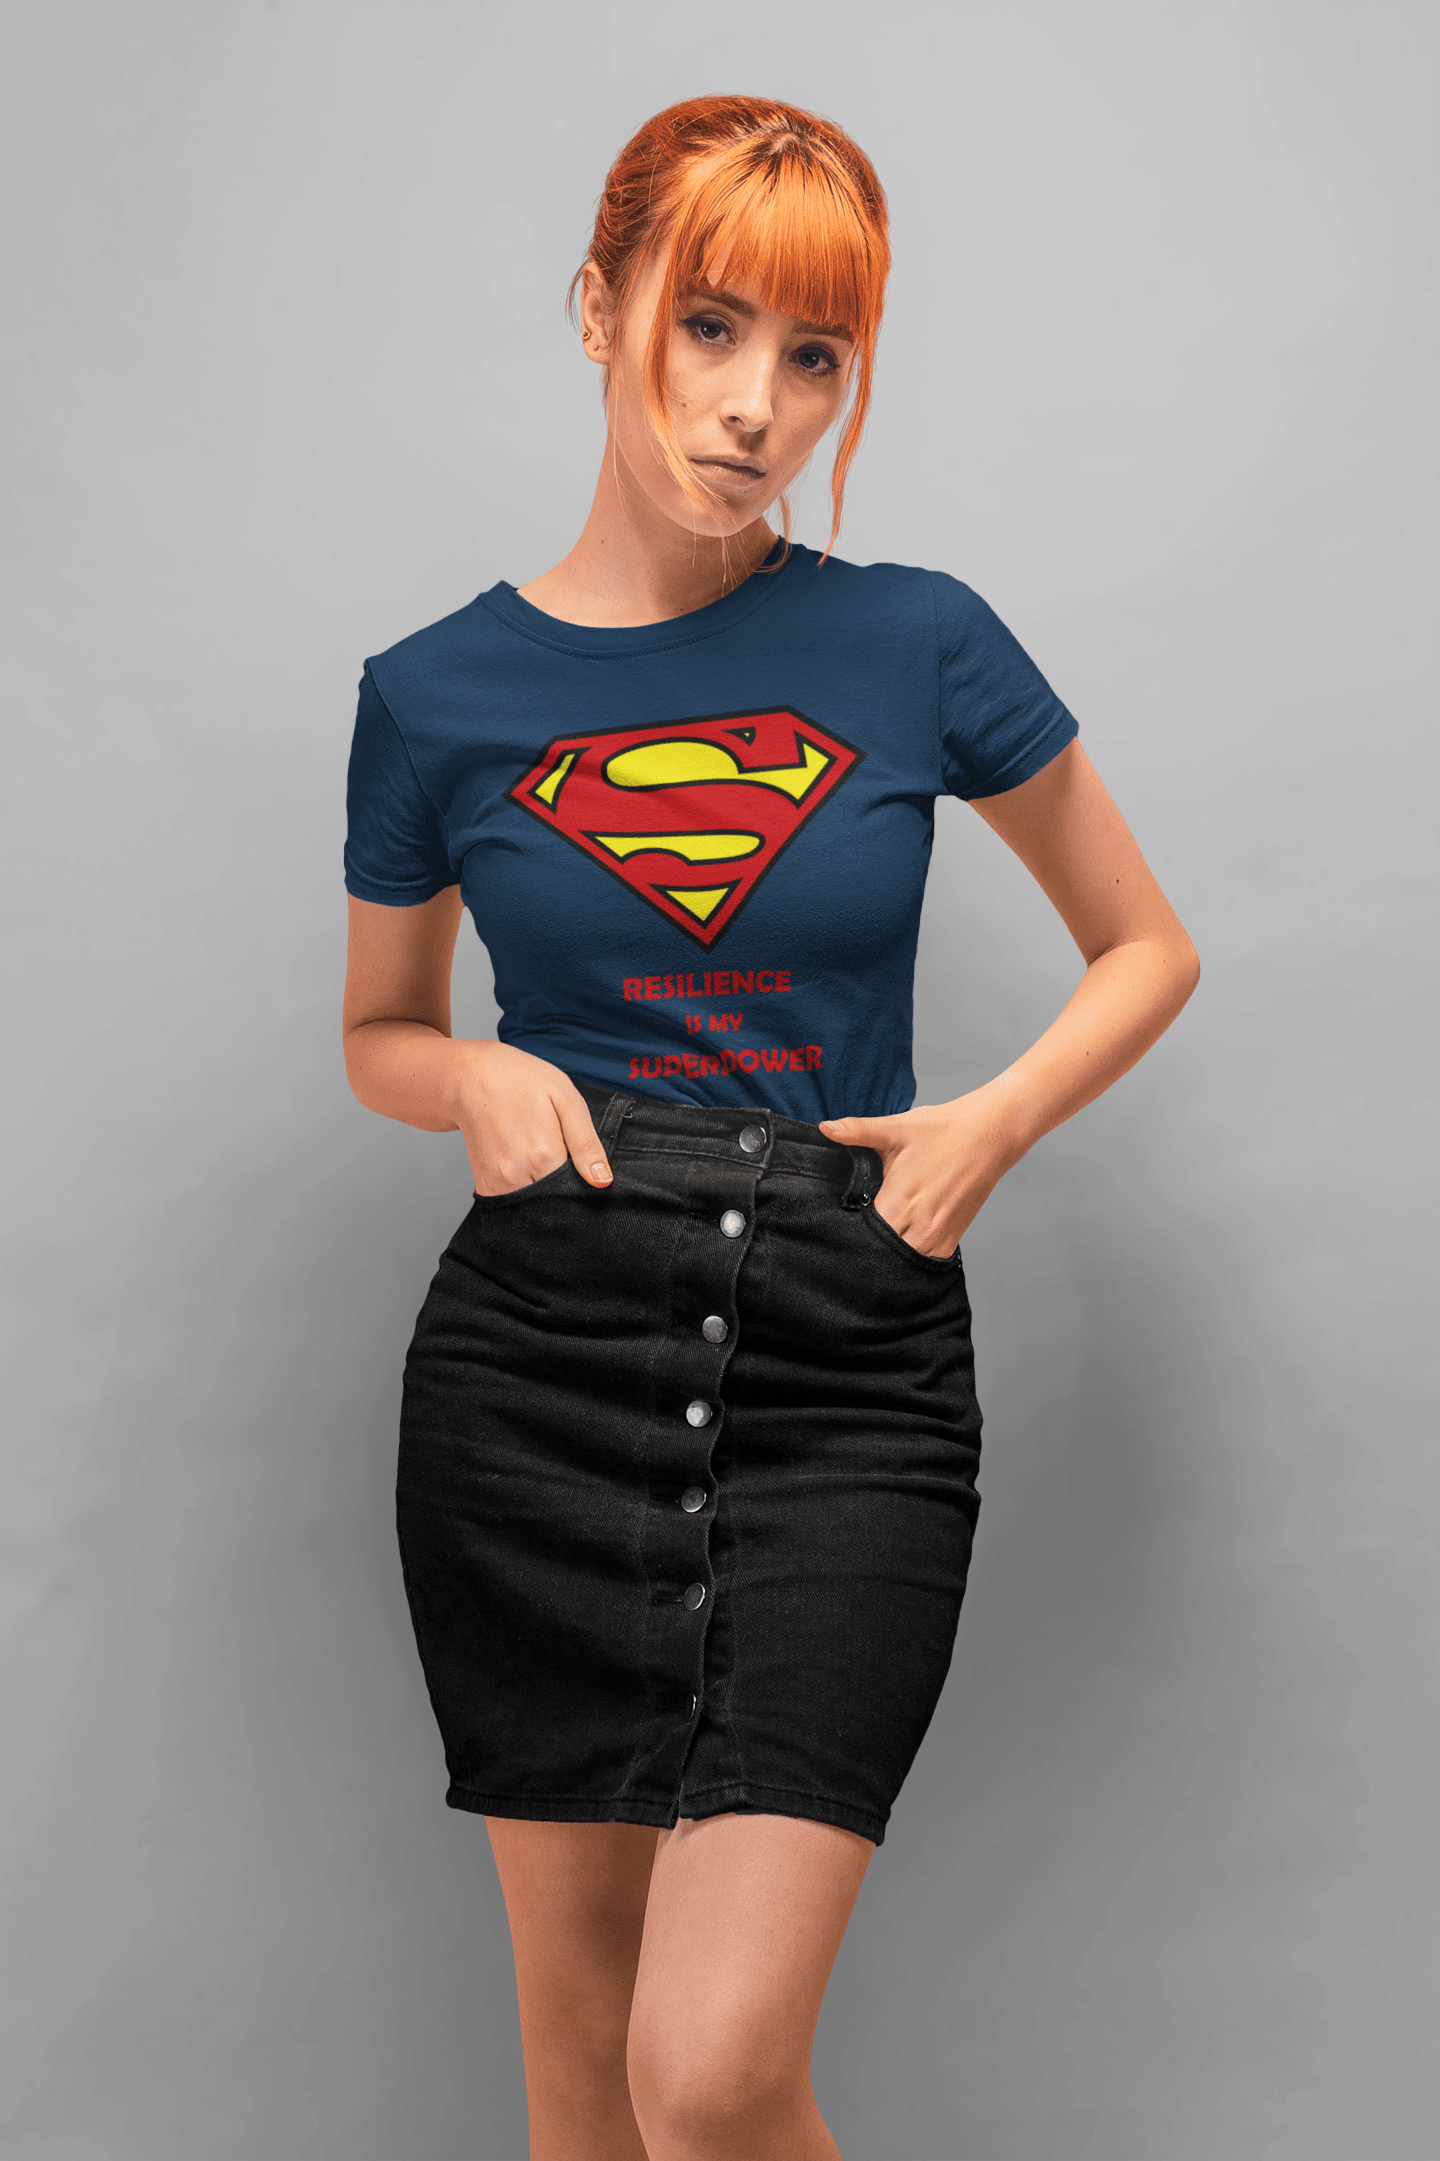 WOMEN'S RESILIENCE IS MY SUPERPOWER ORGANIC COTTON T-SHIRT - Pixel Gallery